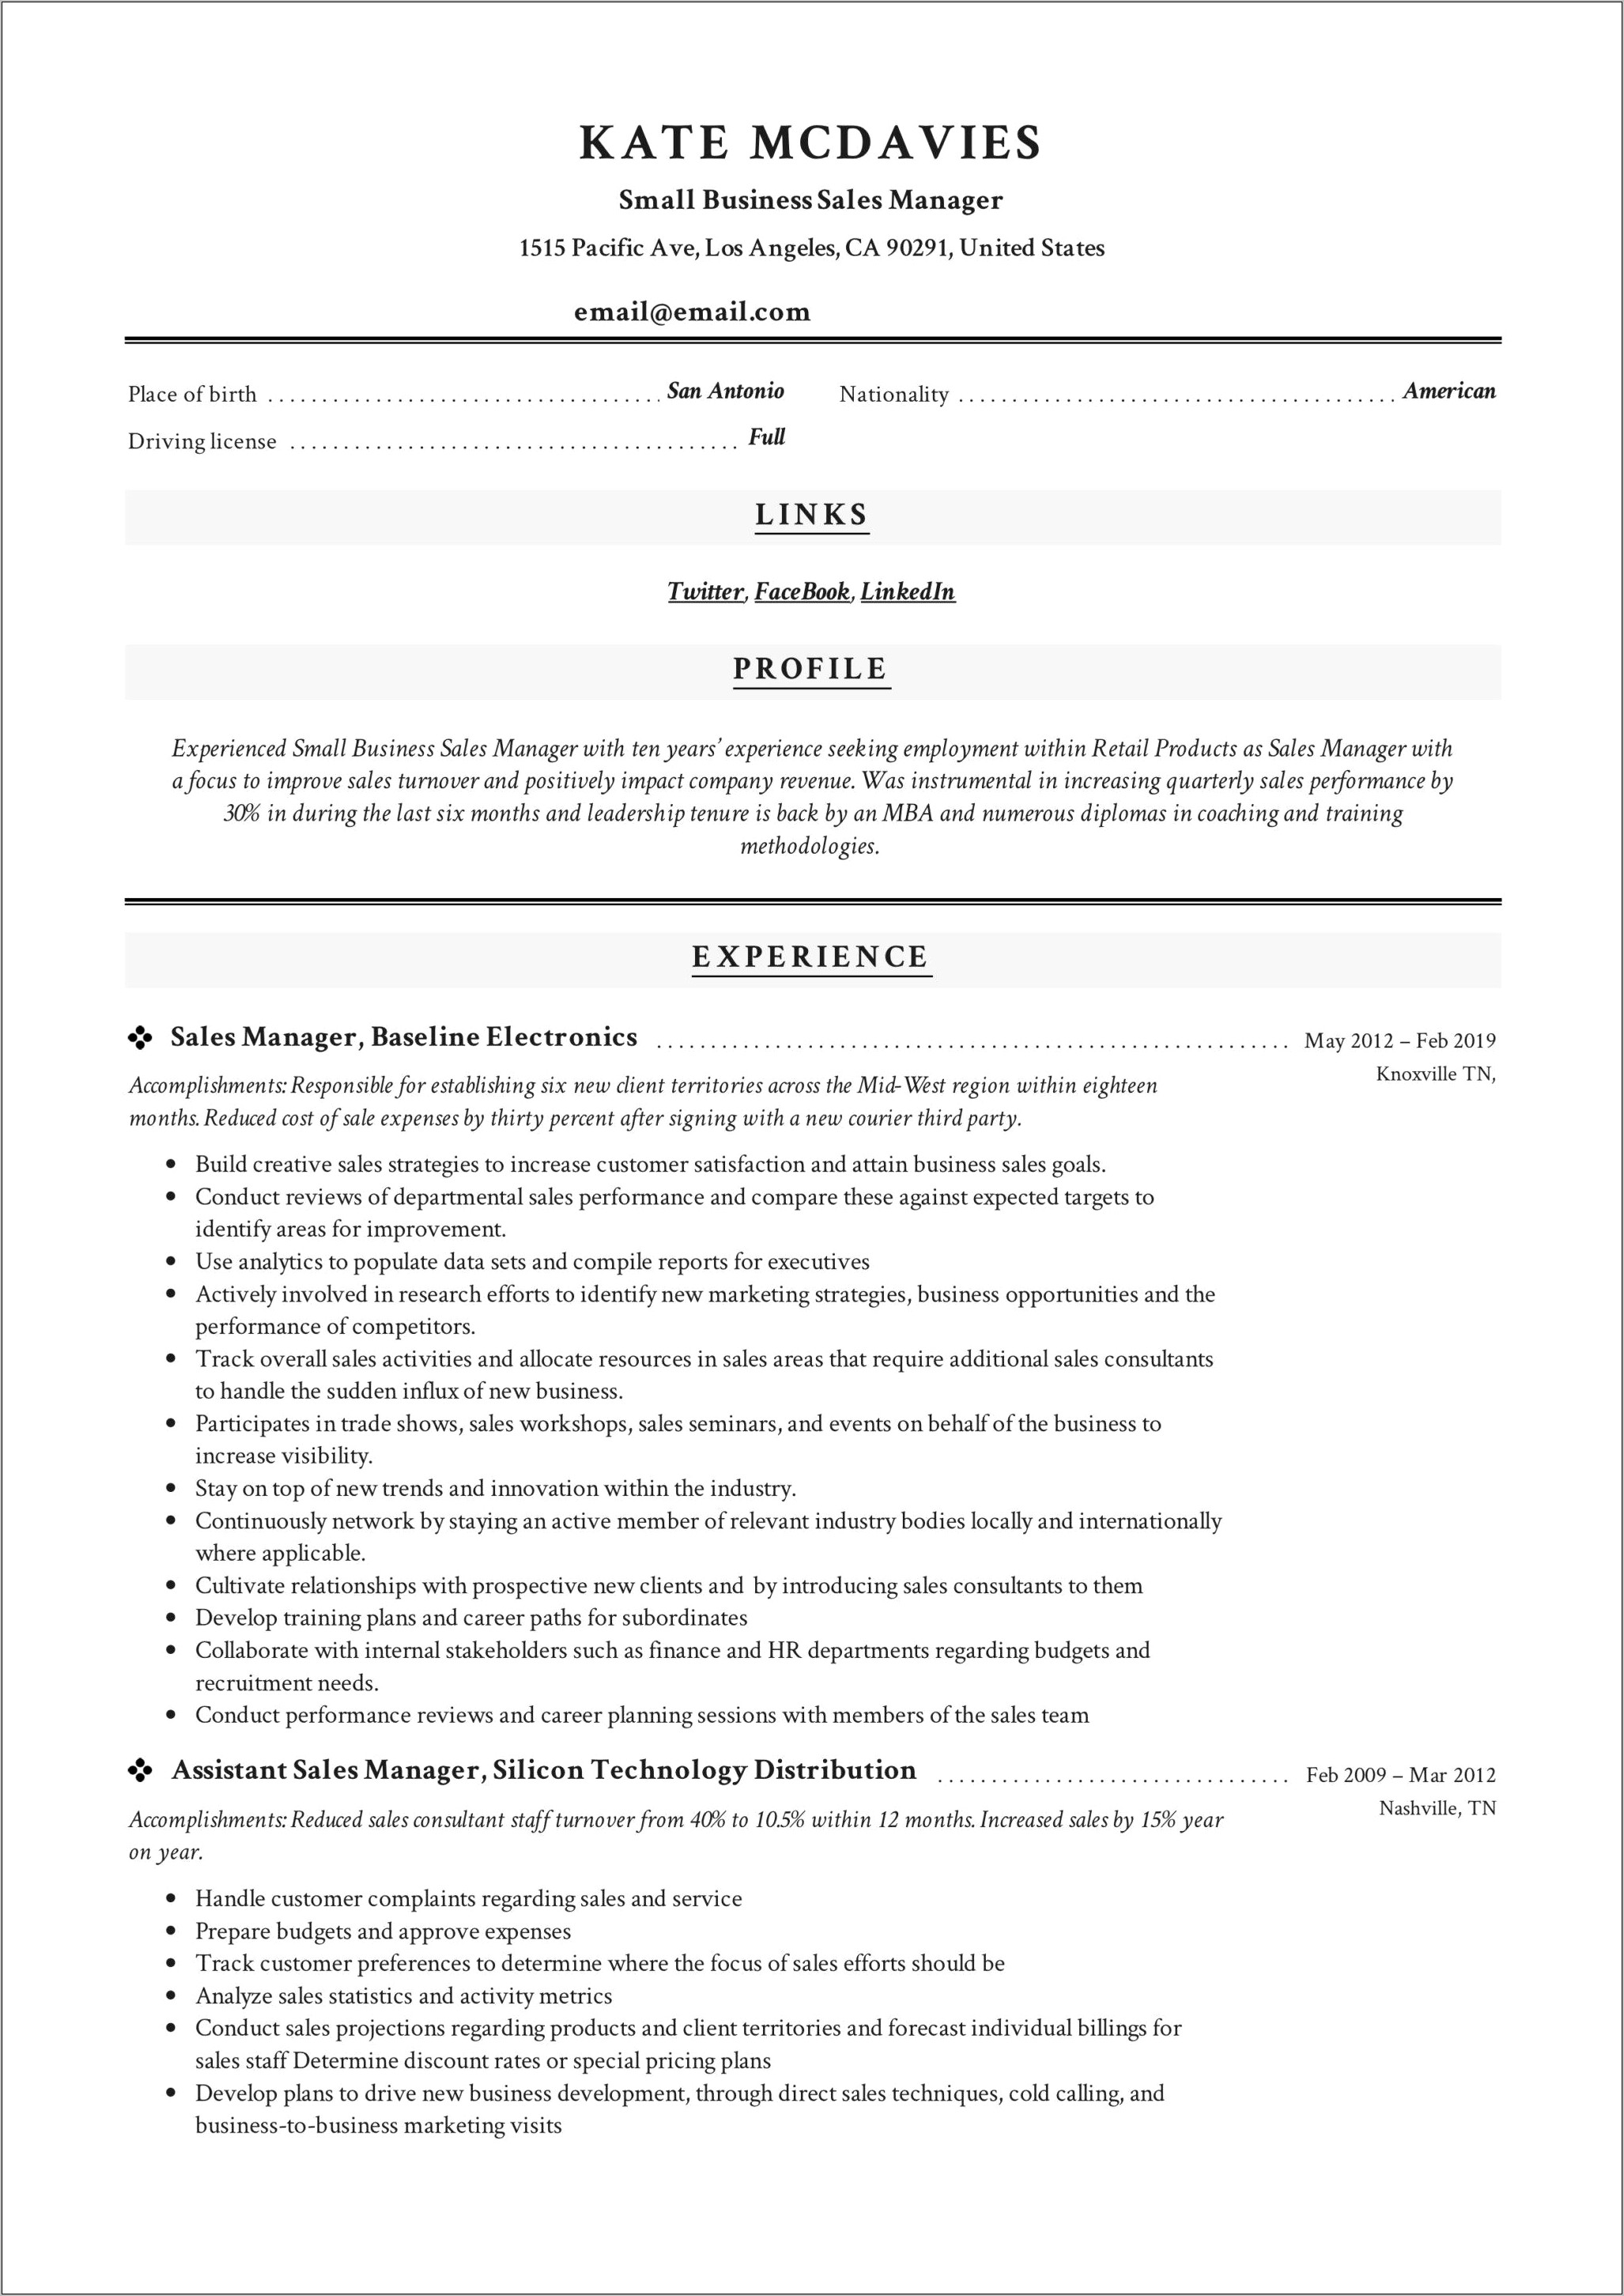 Example Resume For Small Business